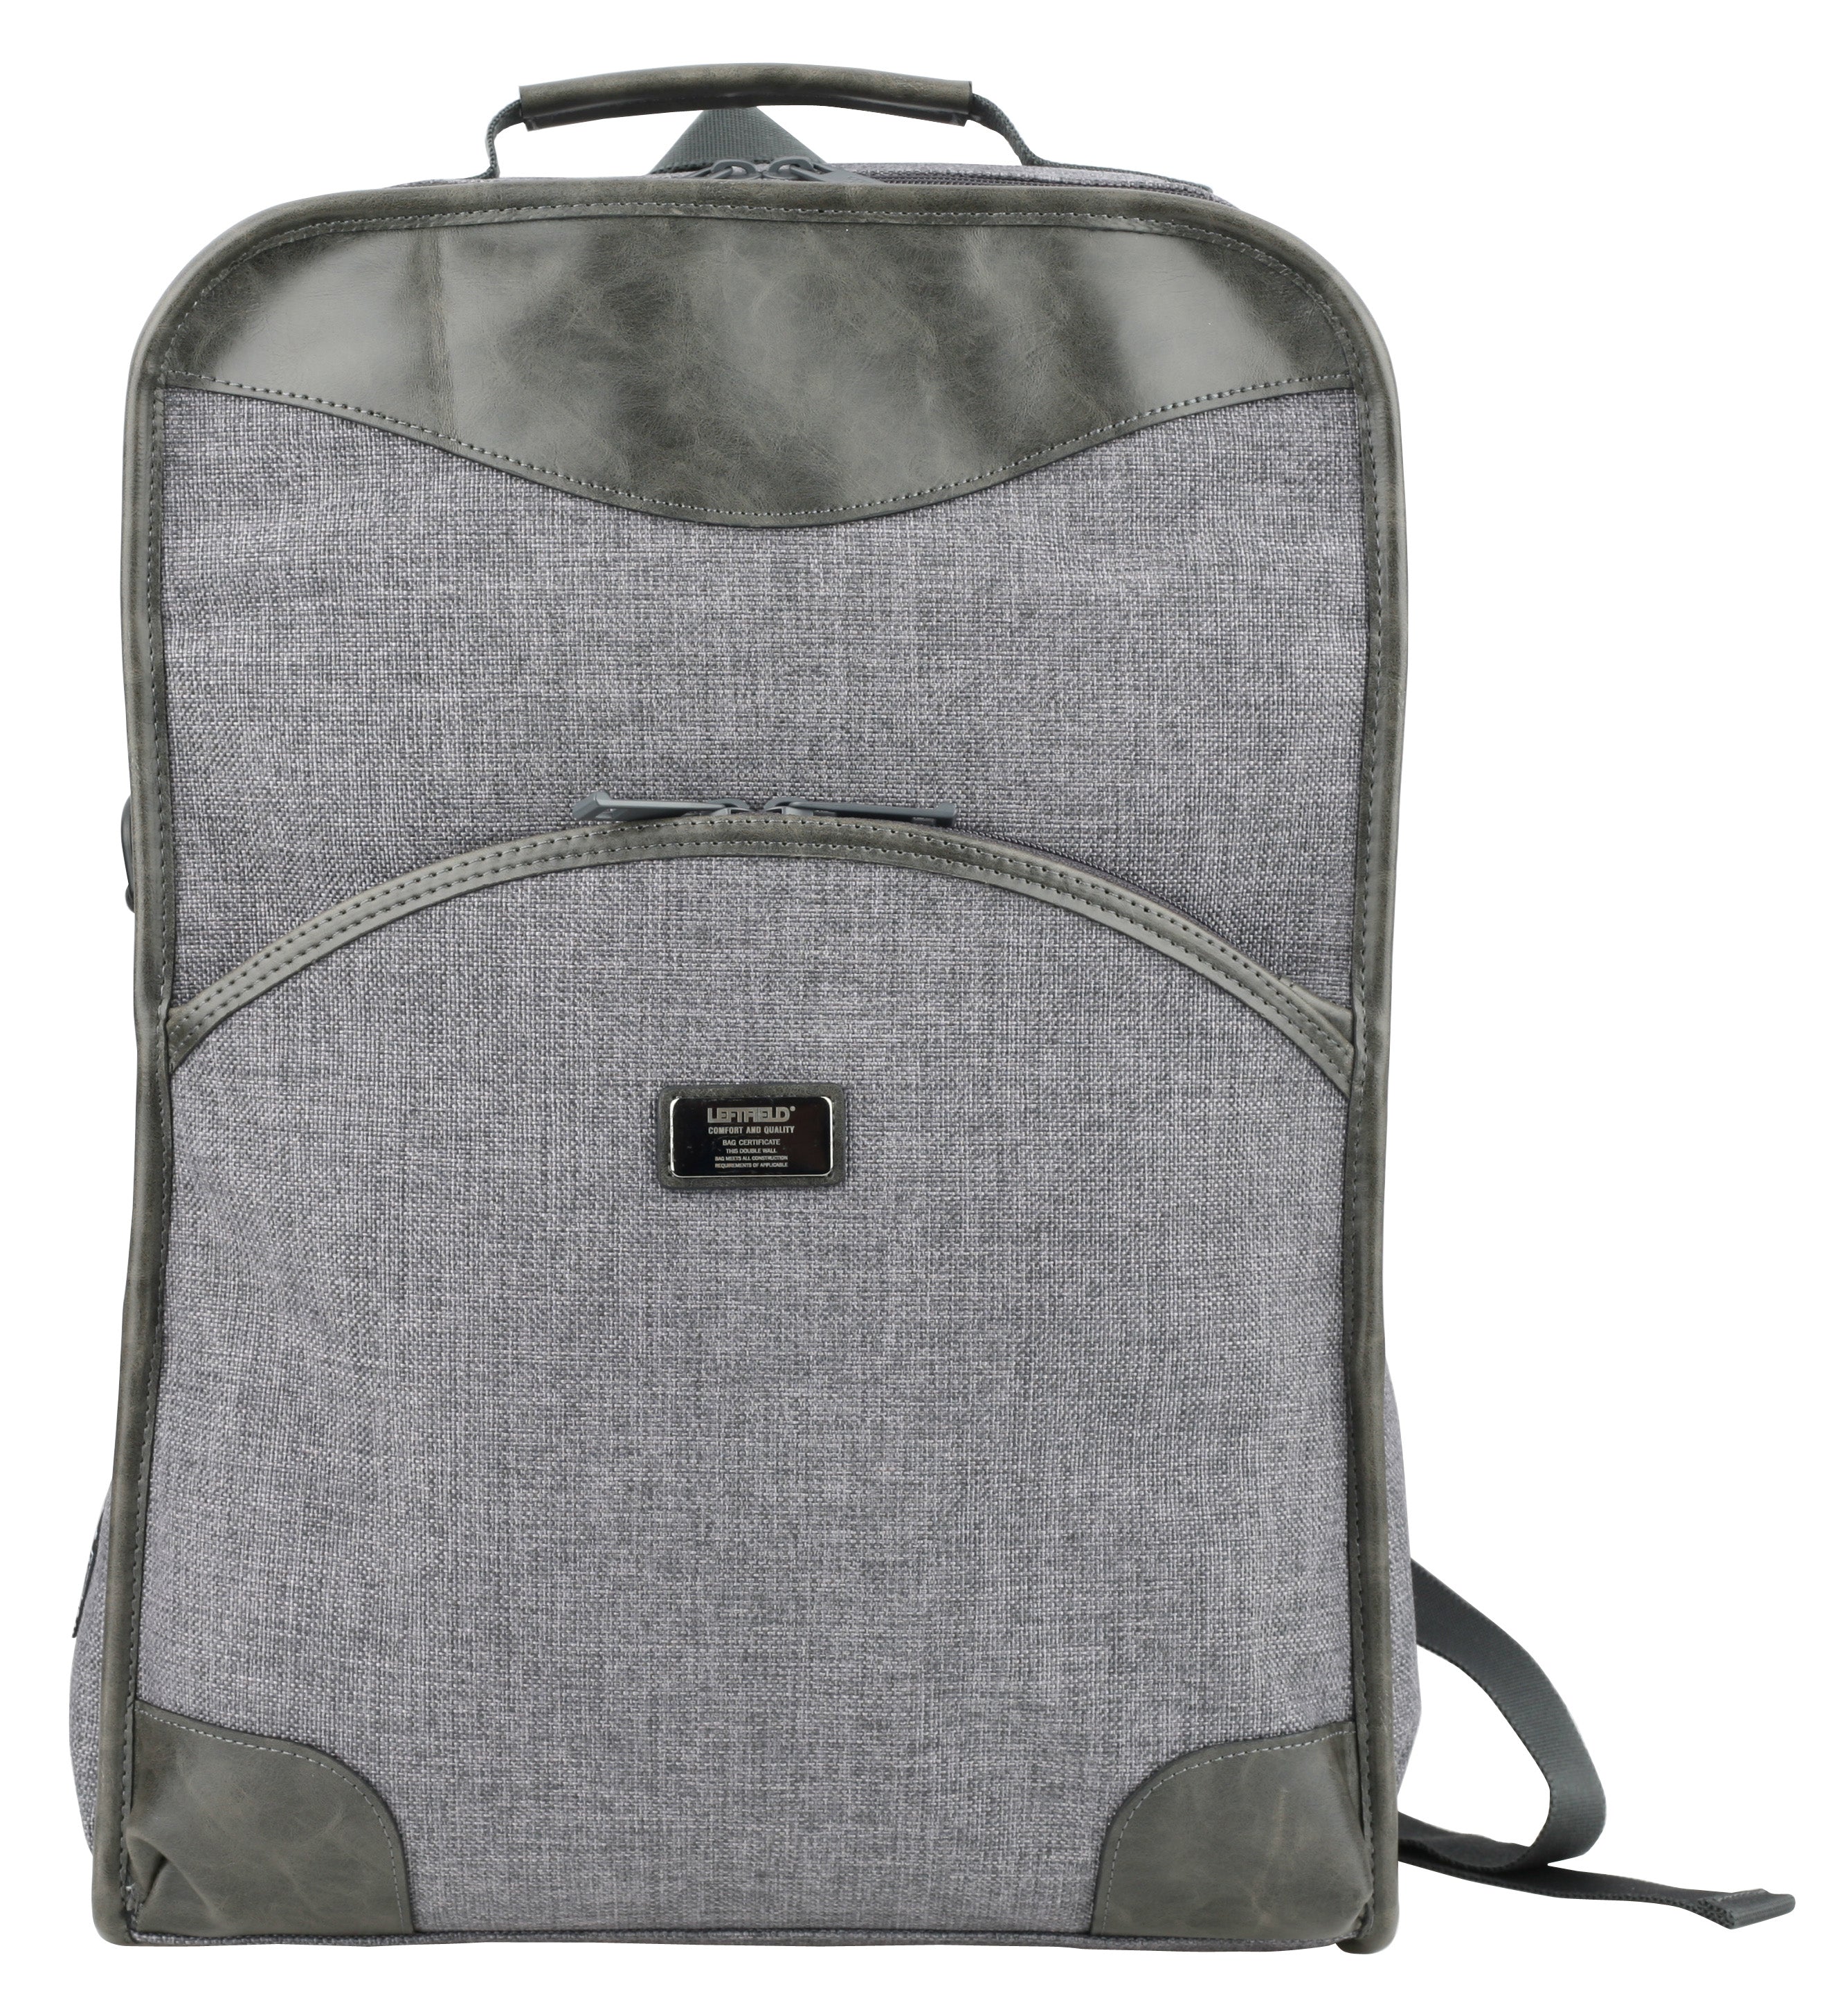 Gray Vintage Canvas Faux Leather School Backpacks